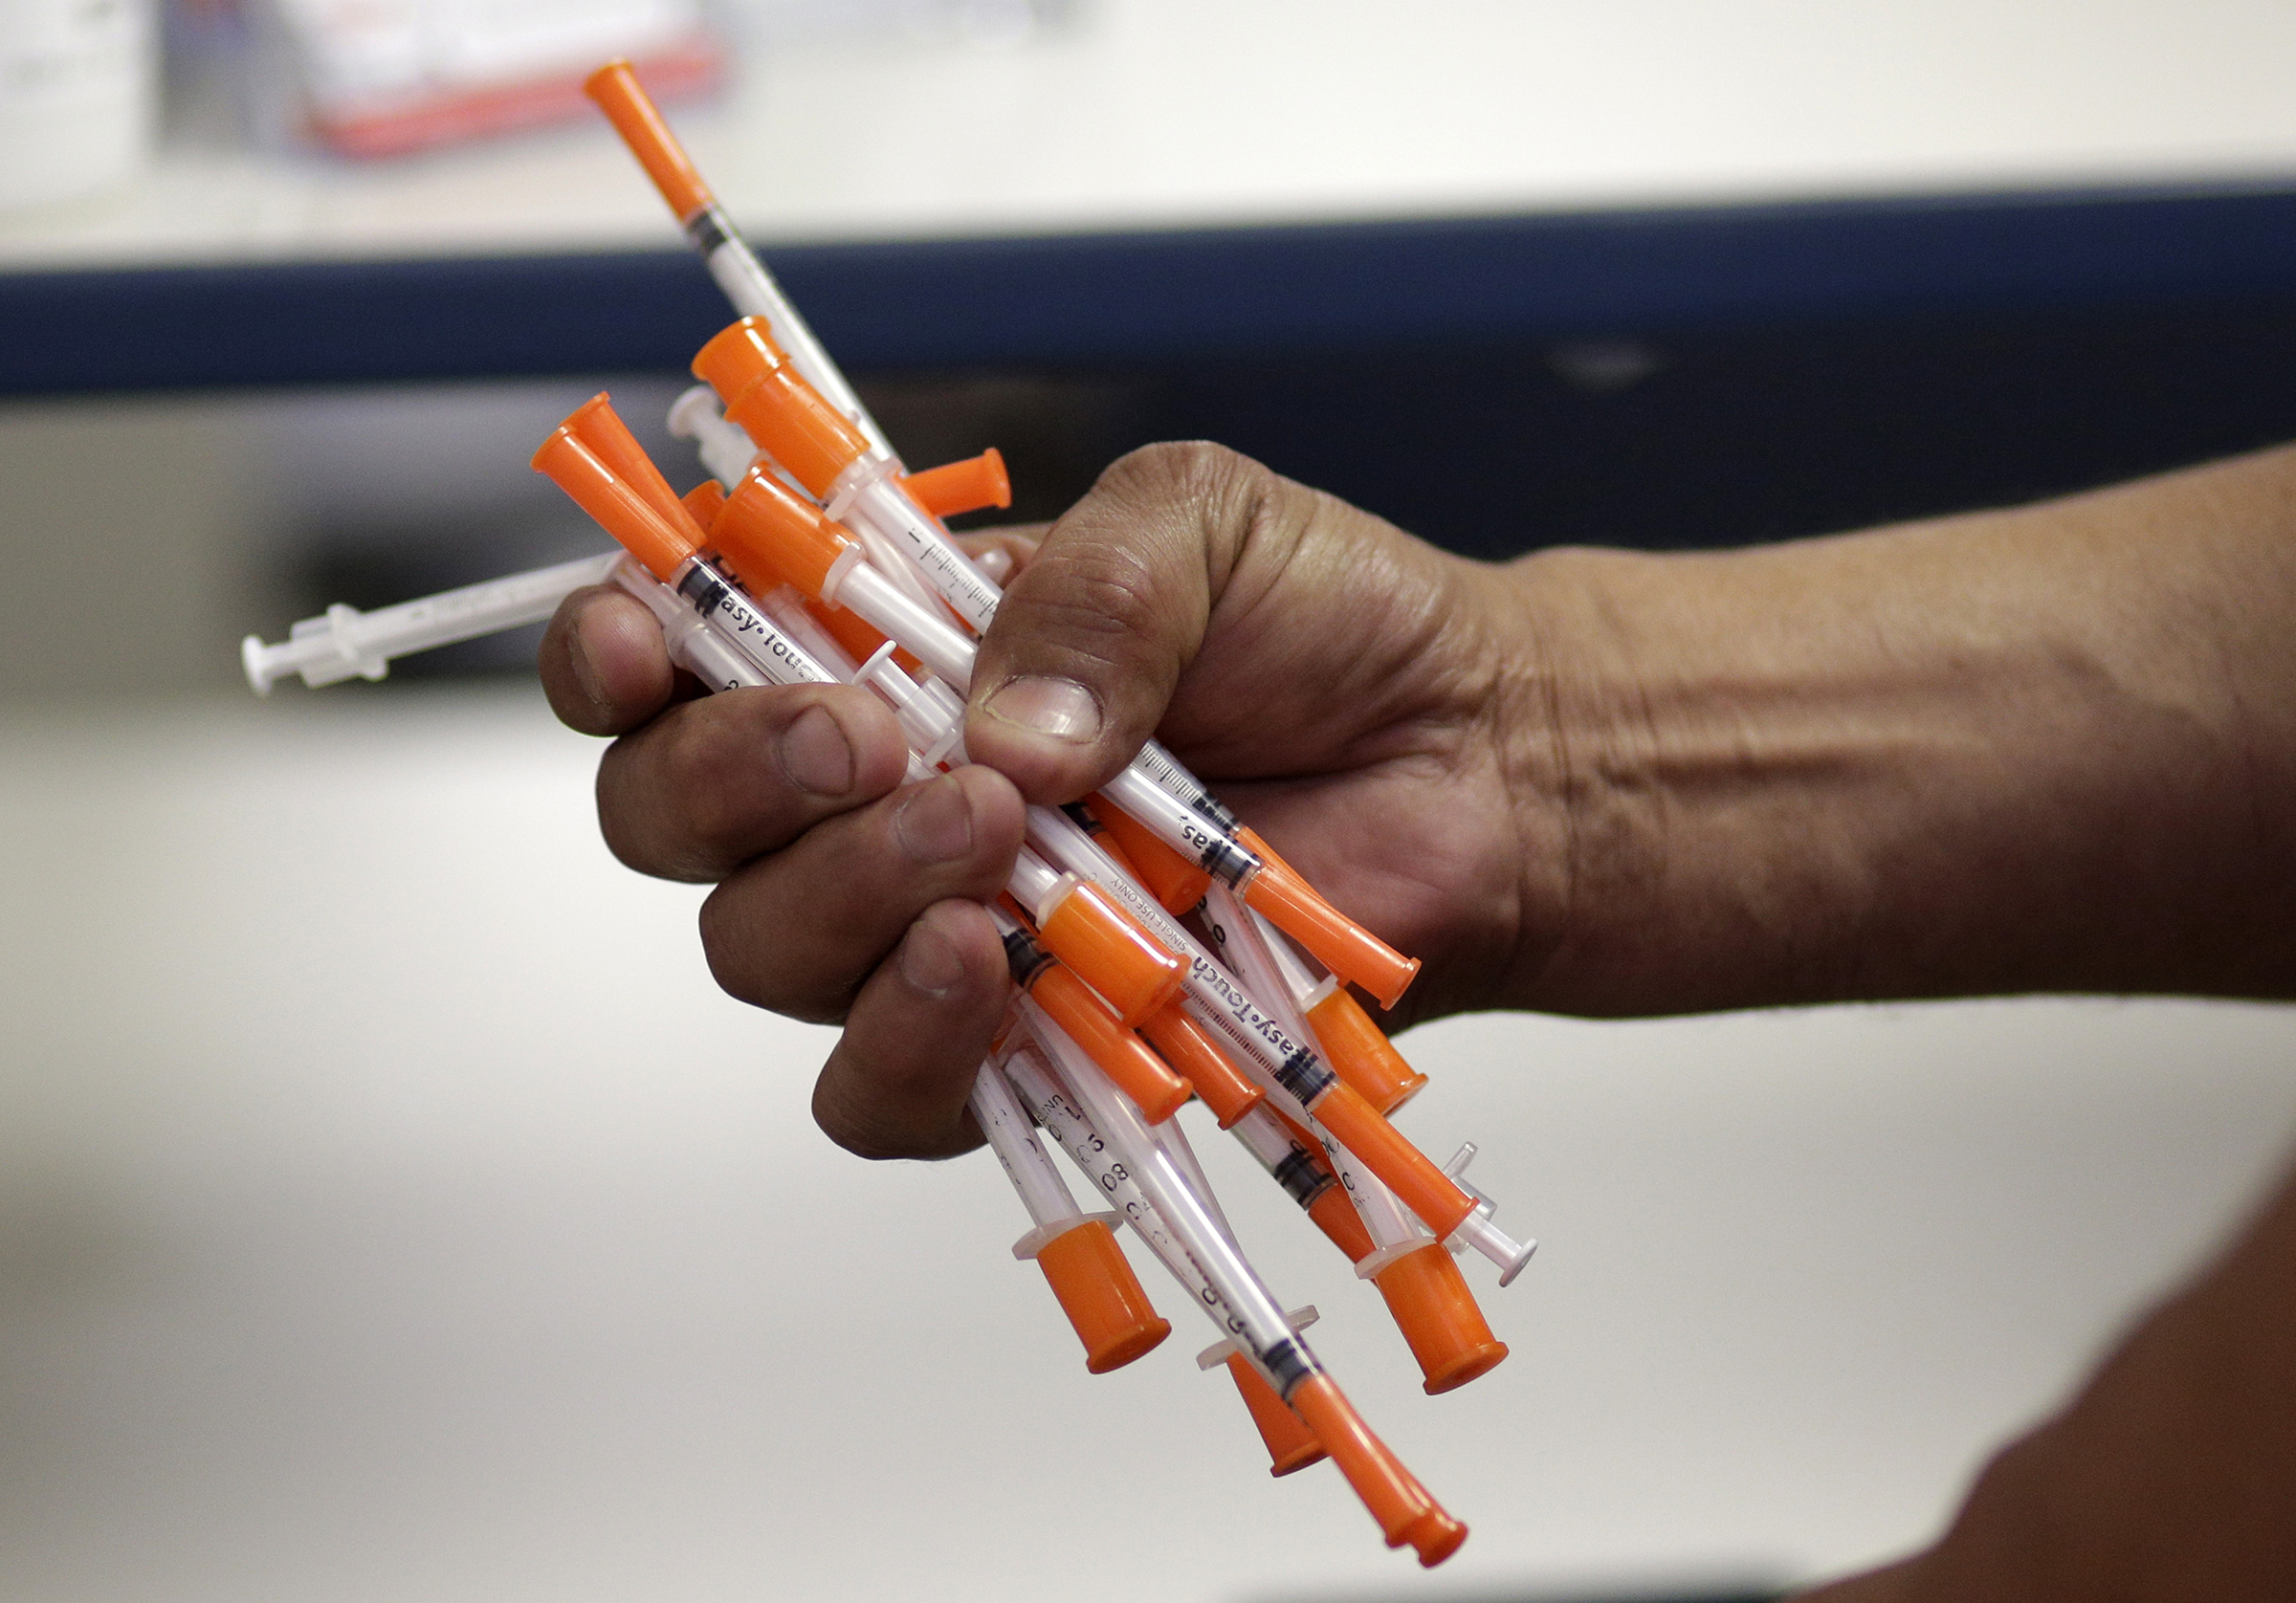 Jose Garcia, an injection drug user, deposits used needles into a container at the IDEA exchange, in Miami on May 6, 2019.